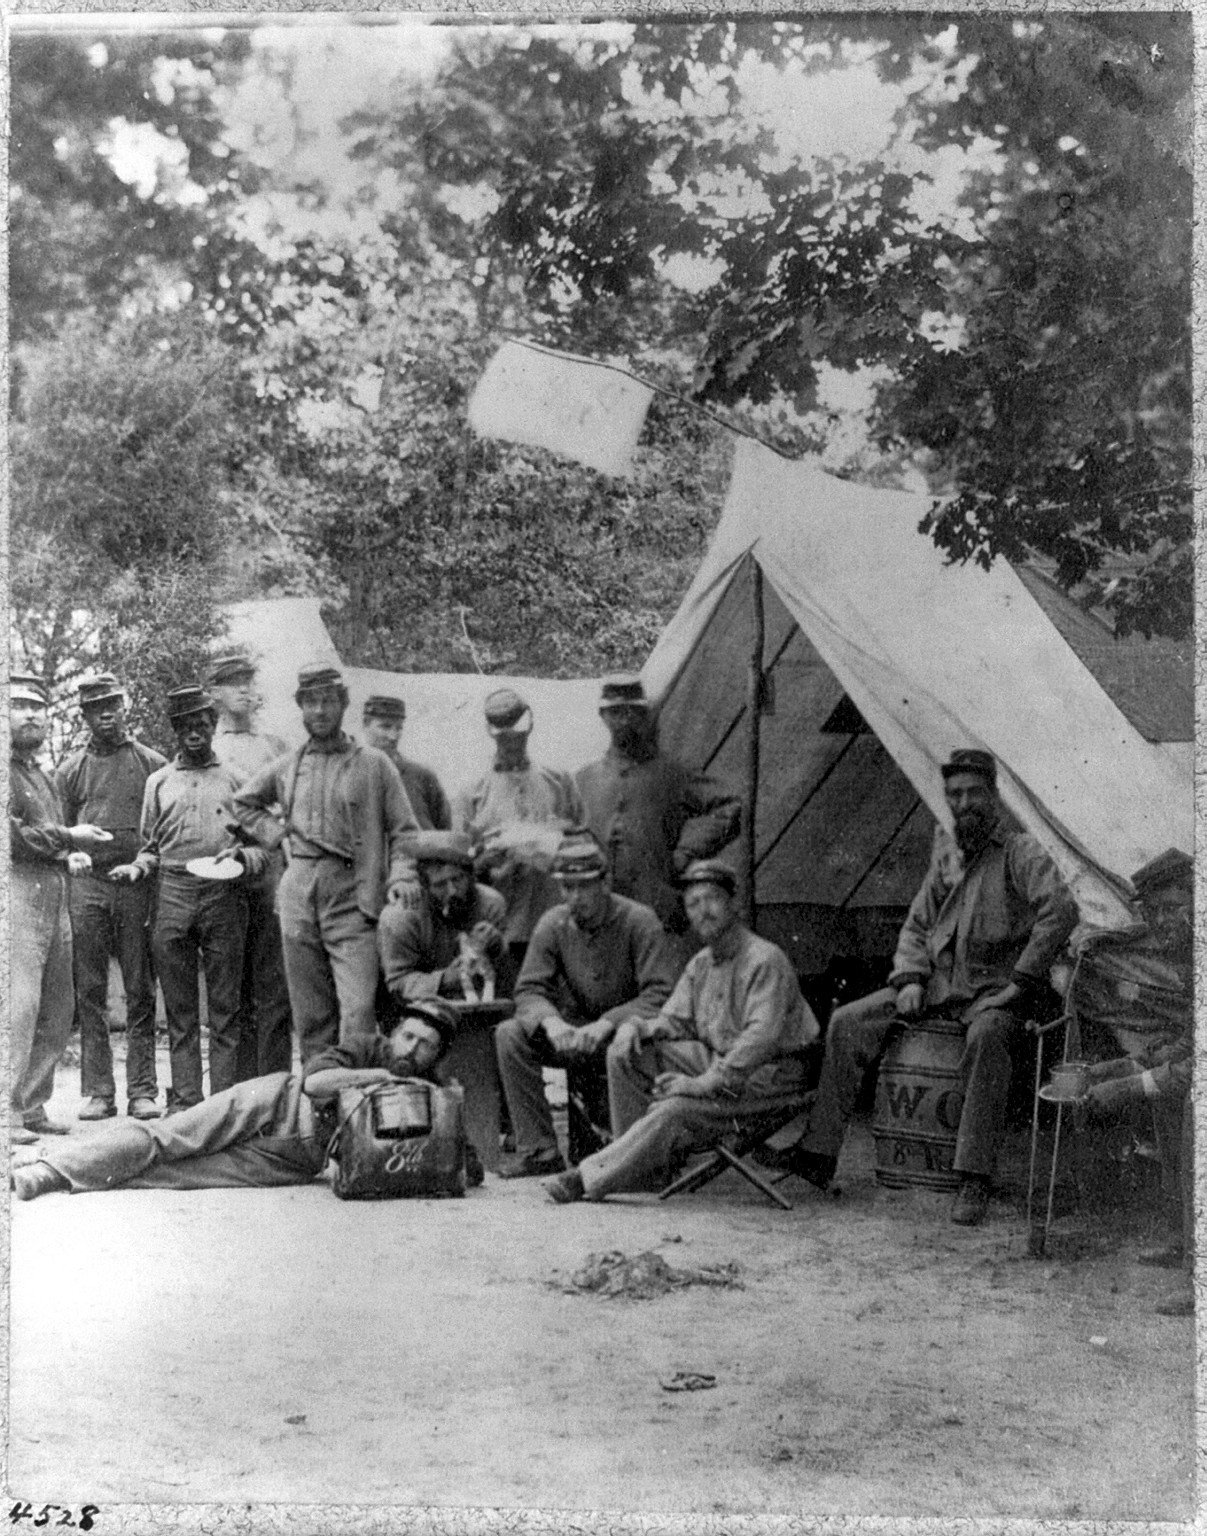 Group of 8th New York State Militia in front of tent, Arlington, Virginia, June 1861